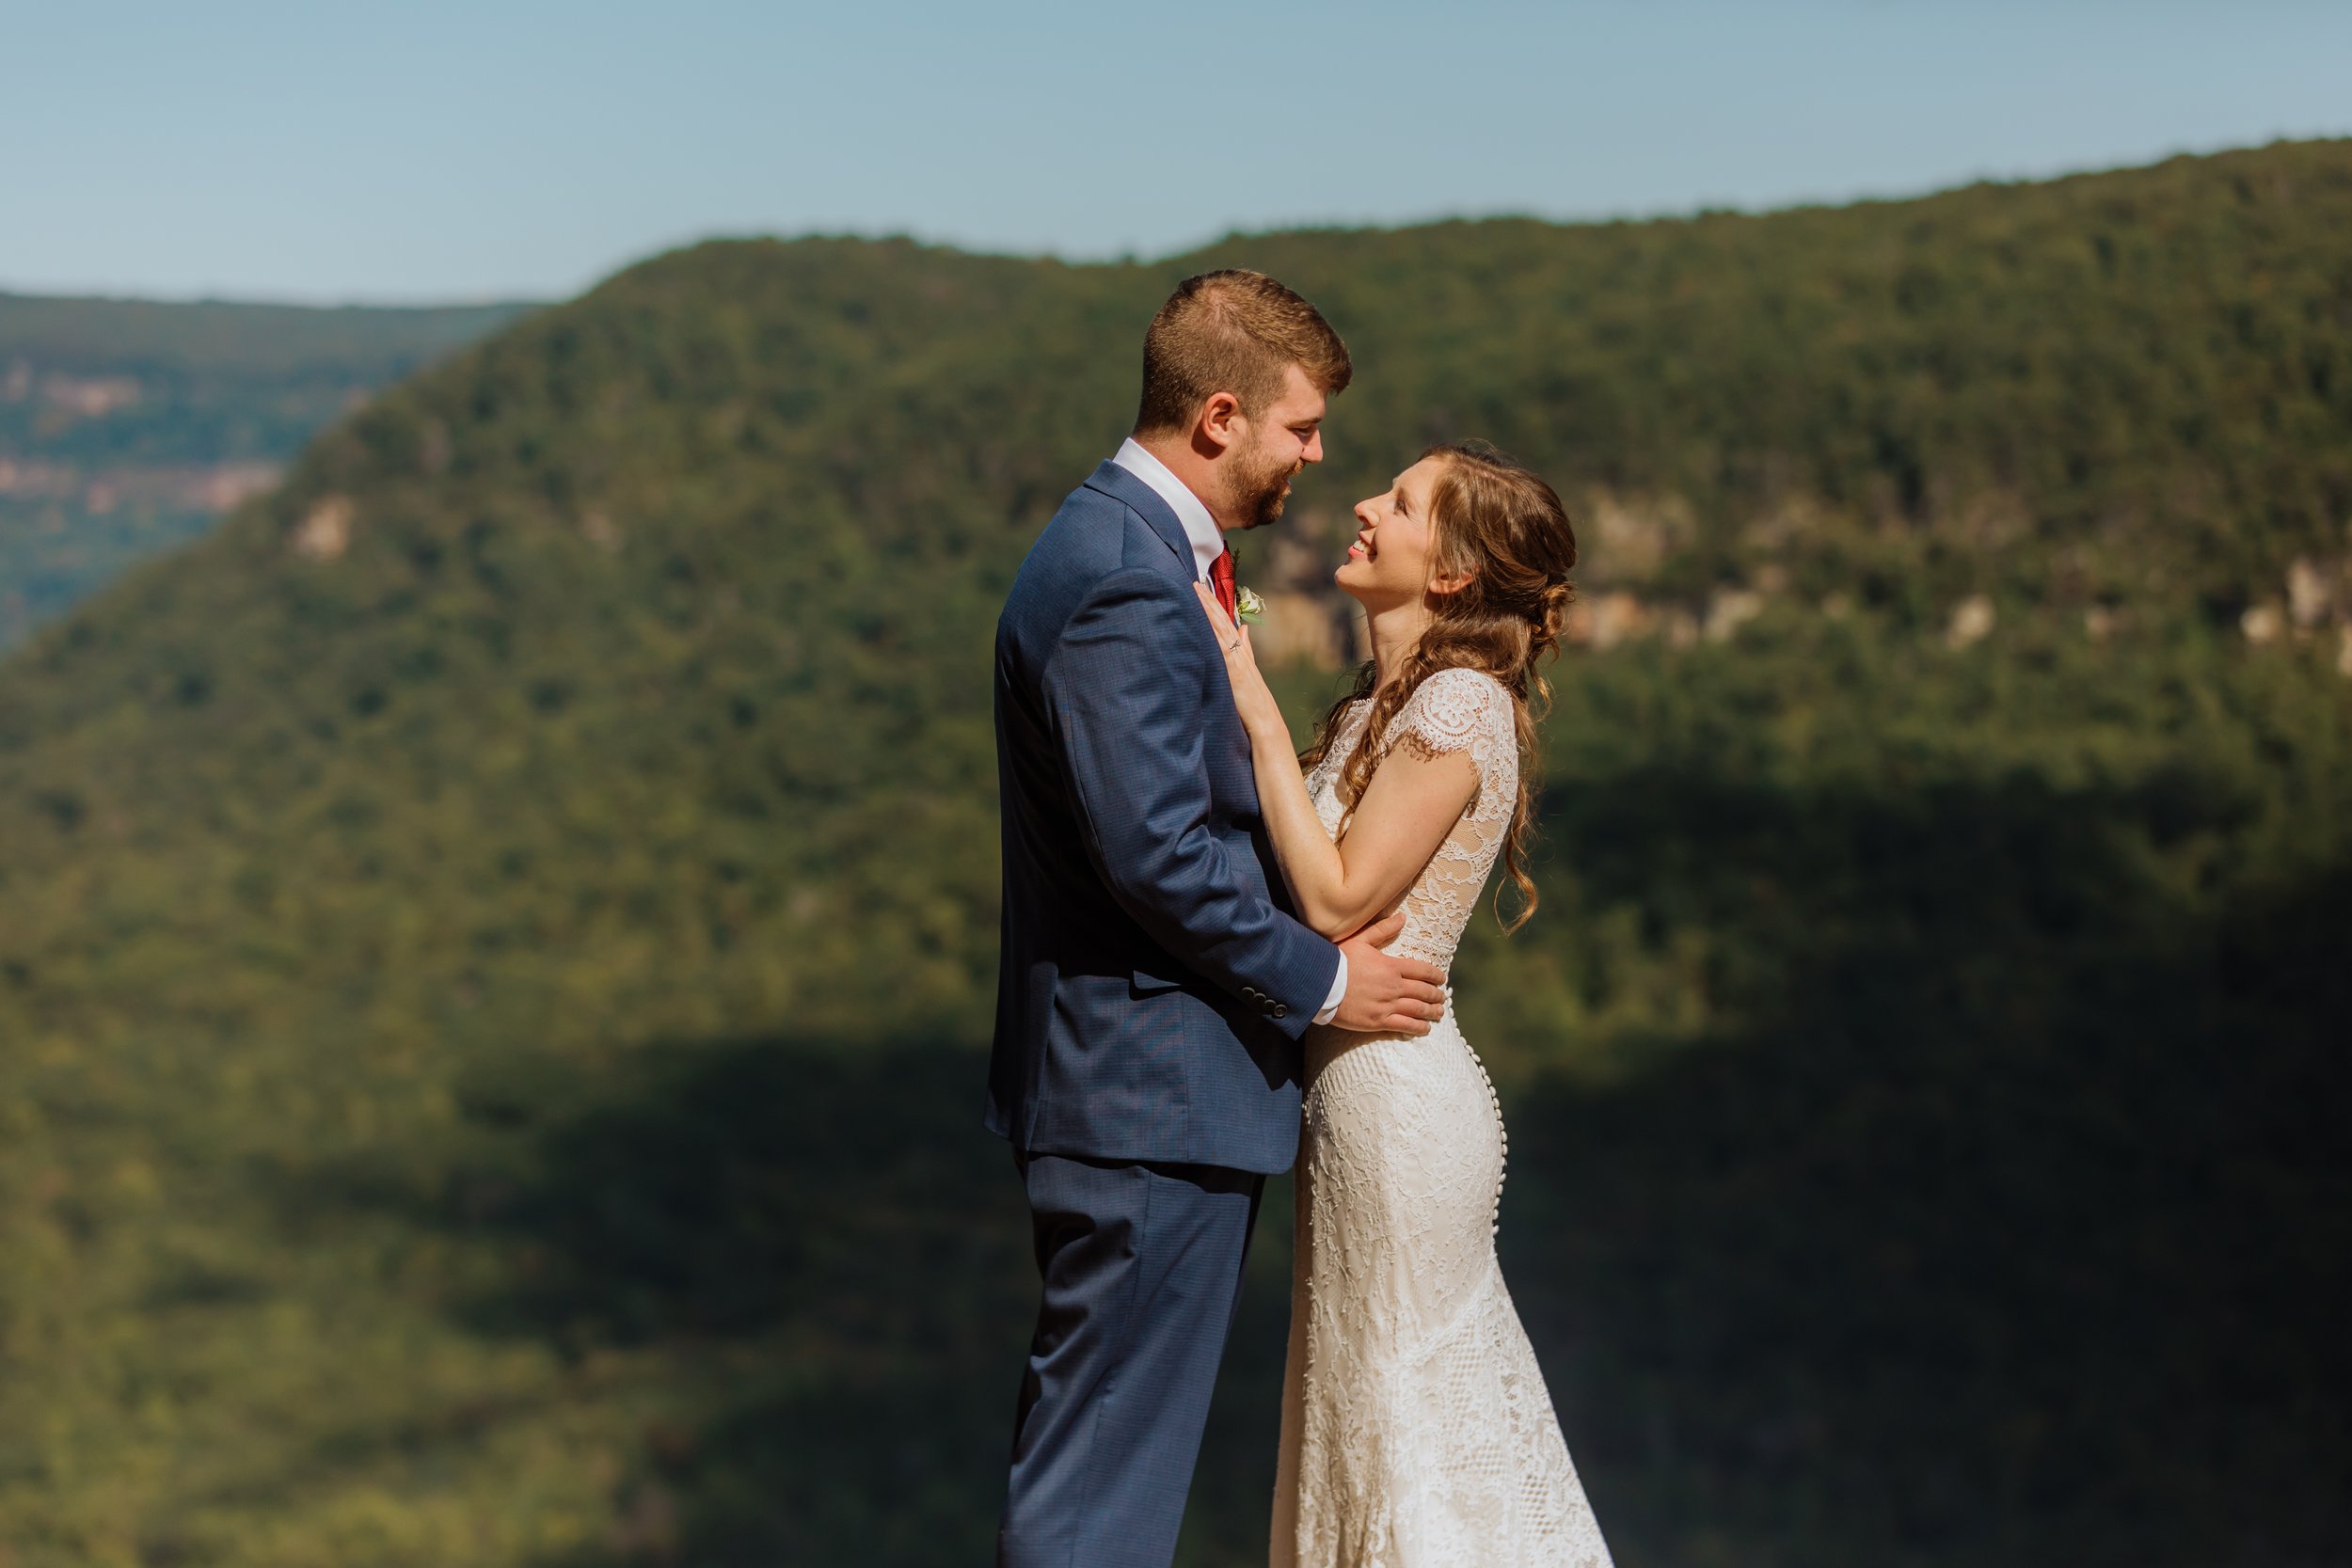  Stunning wedding photography by a top Chattanooga photographer 